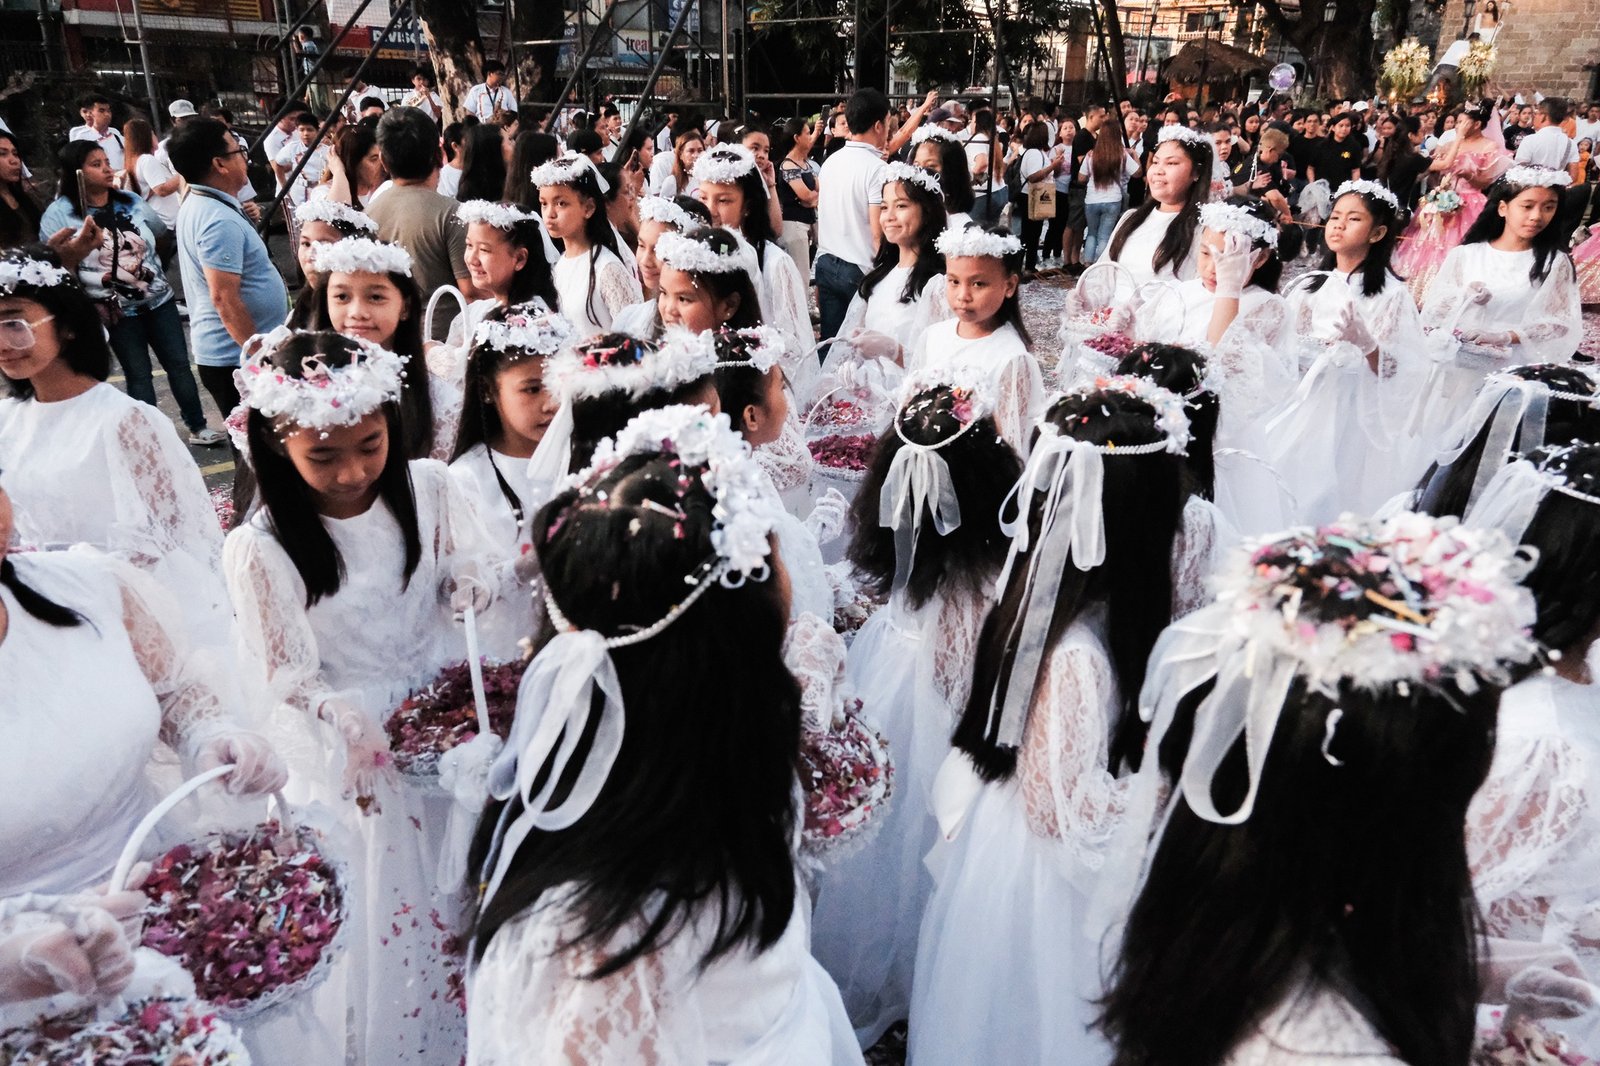 Children toss petals after the Easter Sunday morning festivities on March 31 at the Diocesan Shrine and Parish of St. Jo…